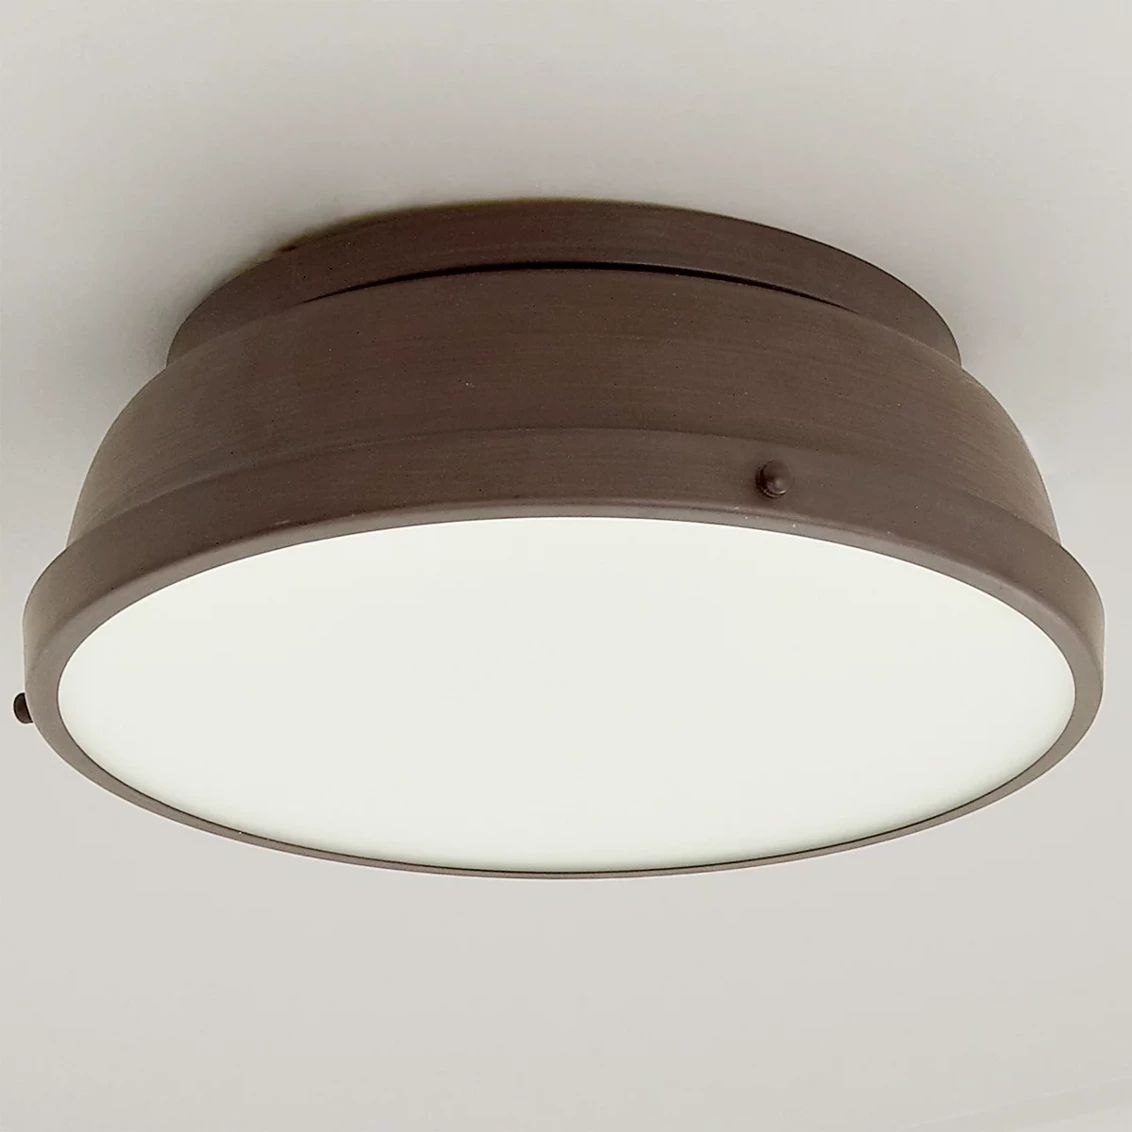 Classic Dome Metal Ceiling Light | Shades of Light